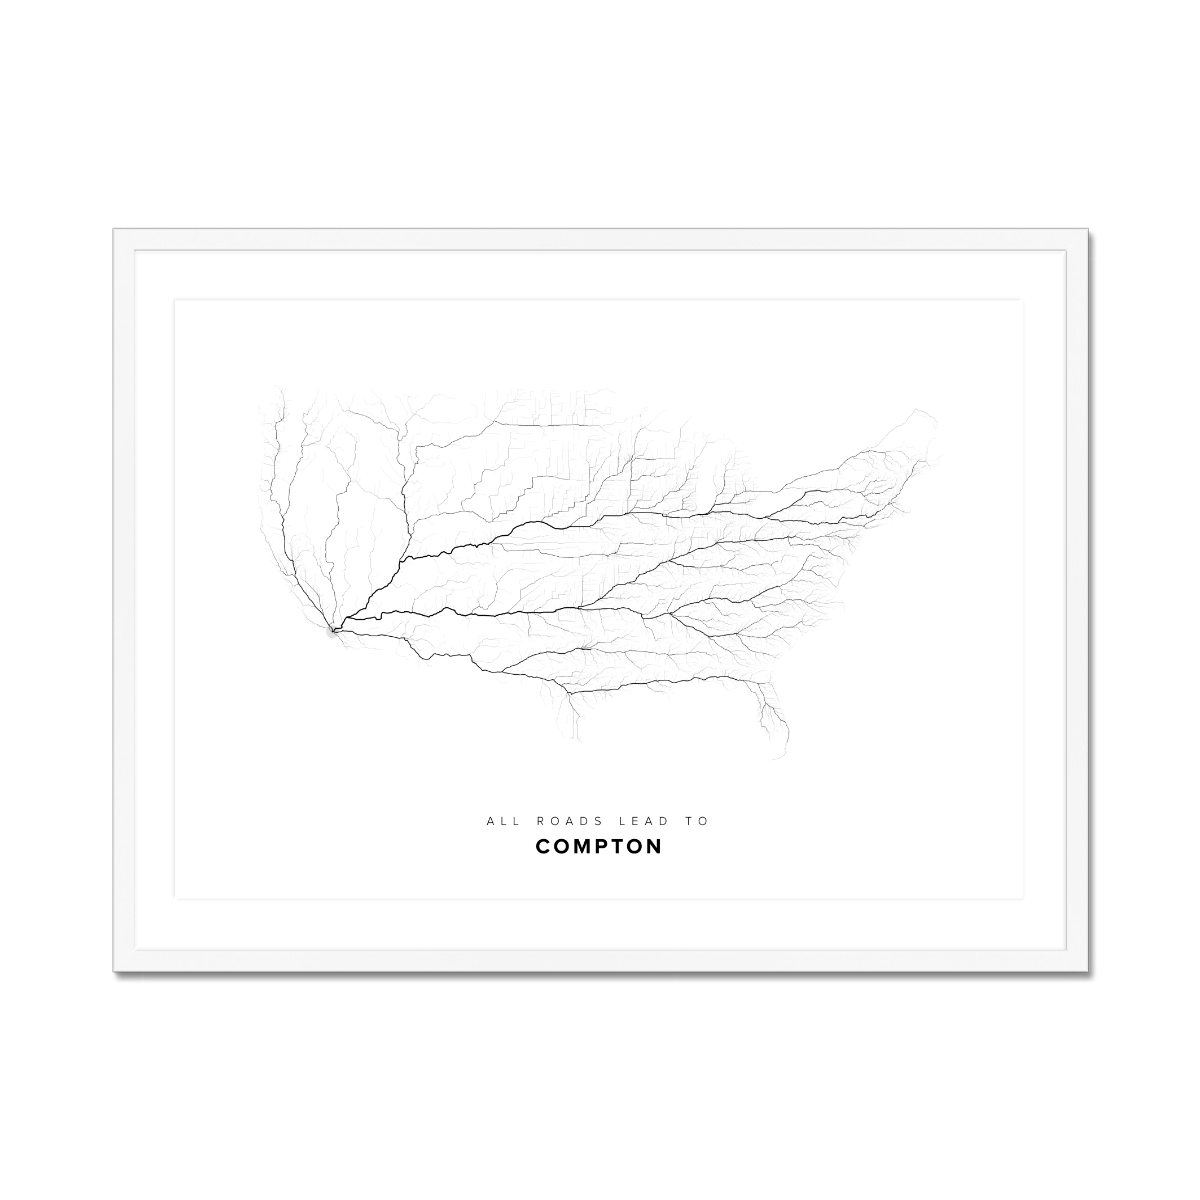 All roads lead to Compton (United States of America) Fine Art Map Print